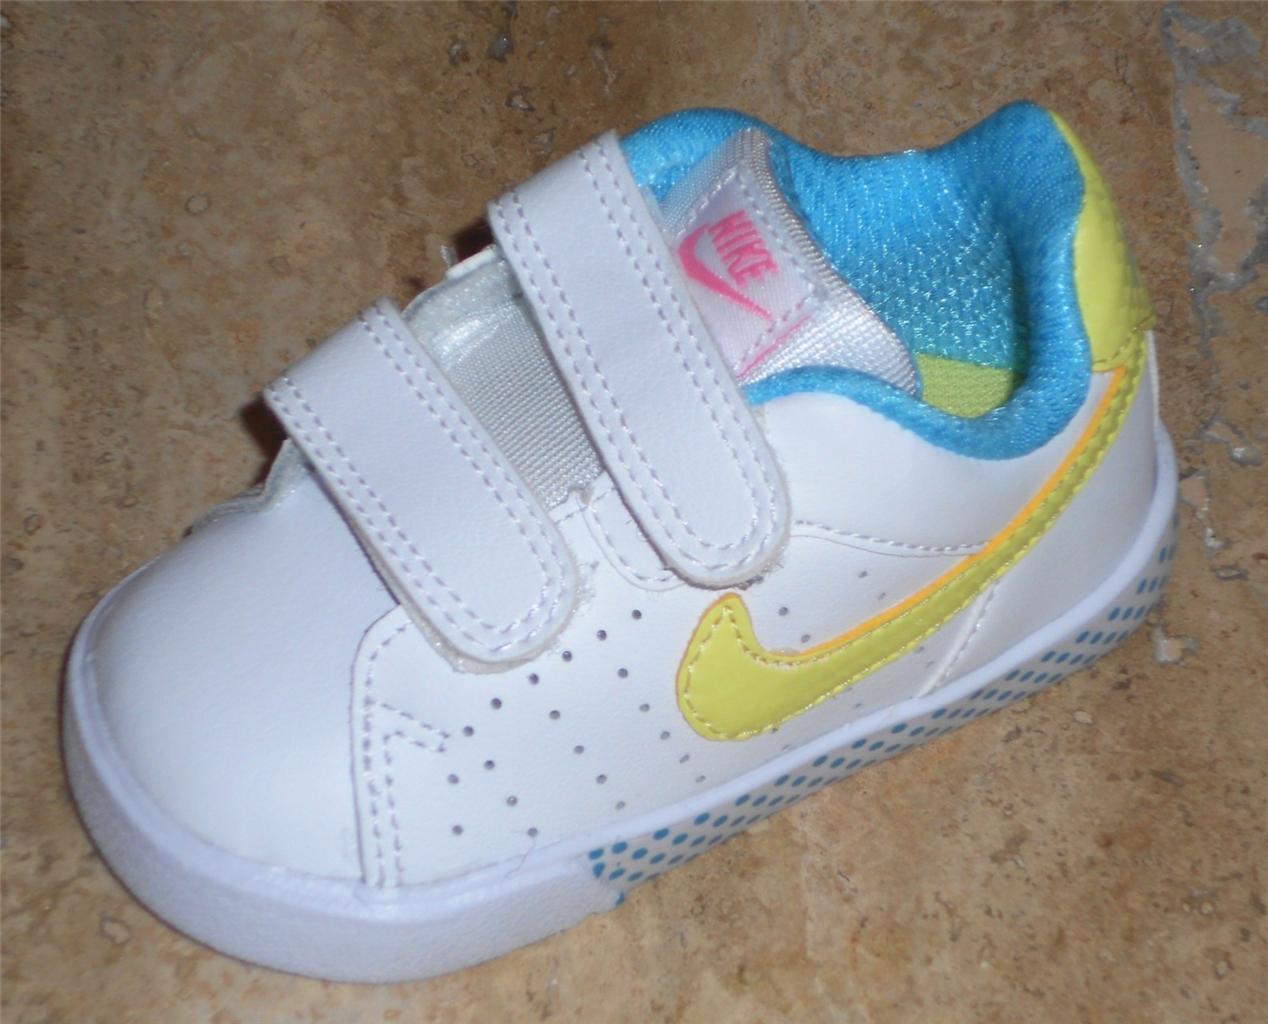 Baby Girl Nike Shoes Size 1 Nike court tour infant toddler